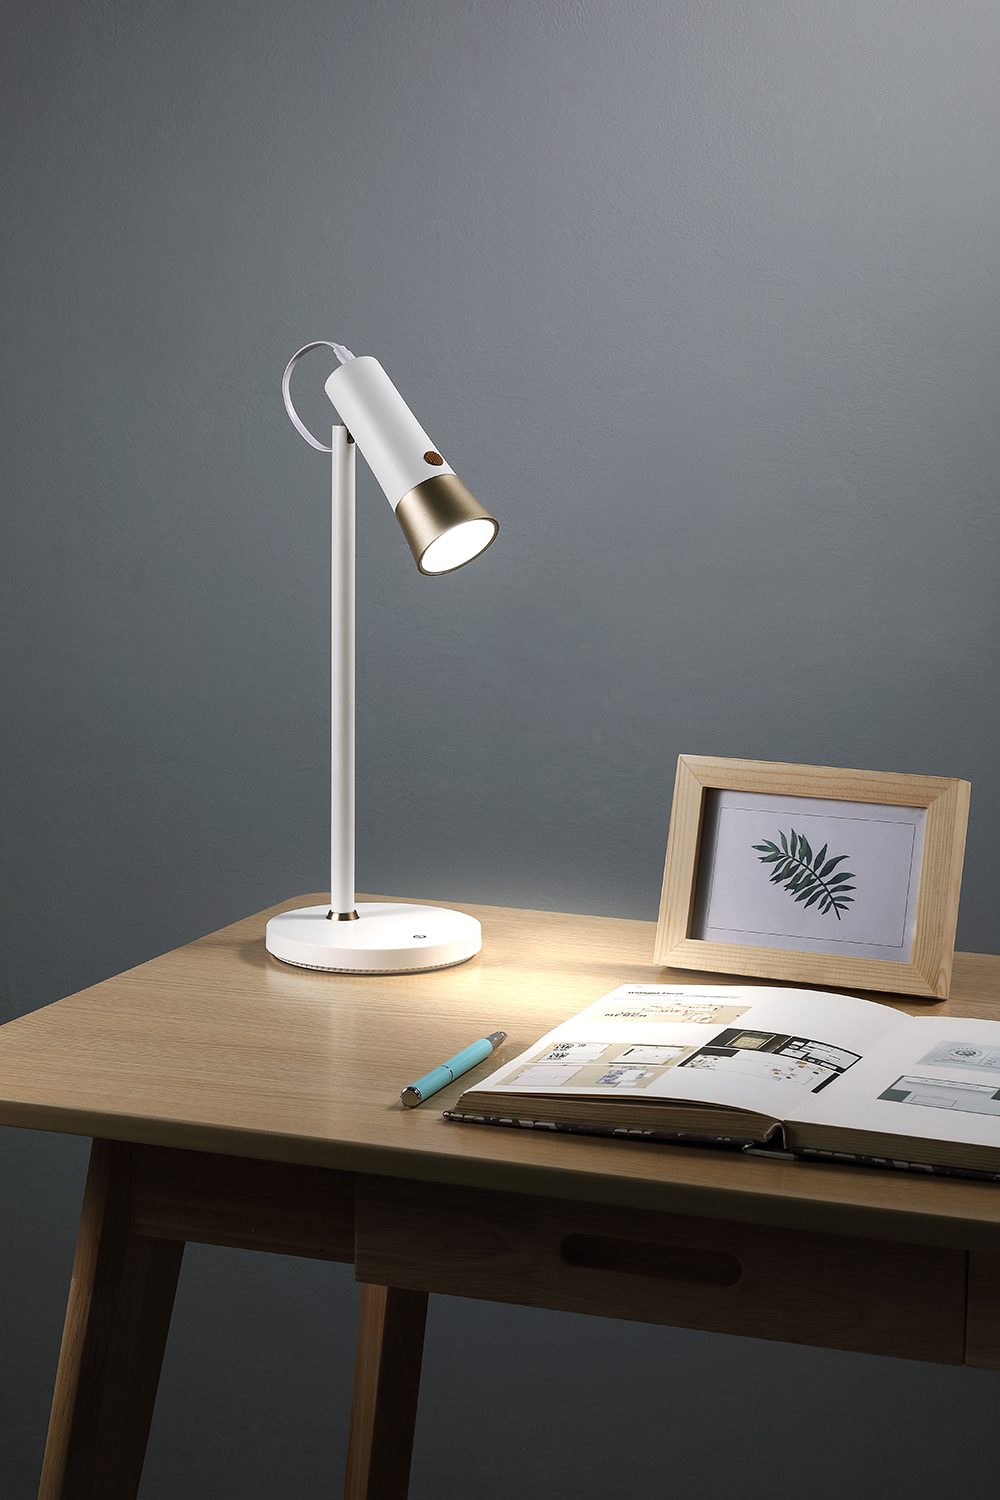 WILIT-F3D-Portable-300LM-LED-Desk-Lamp-With-Torch-Function-Built-in-18650-37V2200mAh-Lithium-Battery-1947422-9